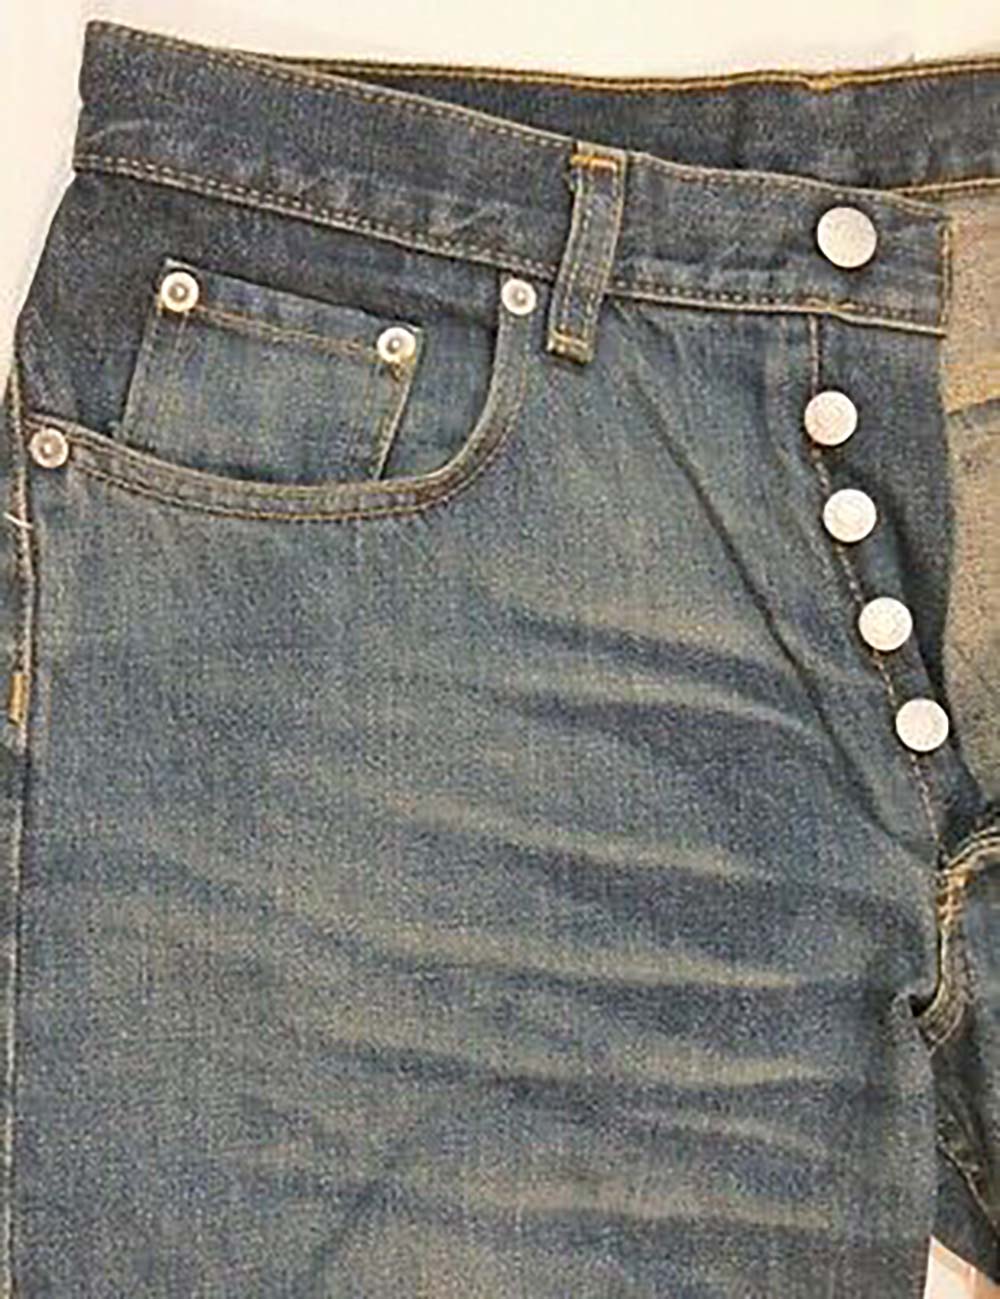 JEANS, A FRENCH HISTORY